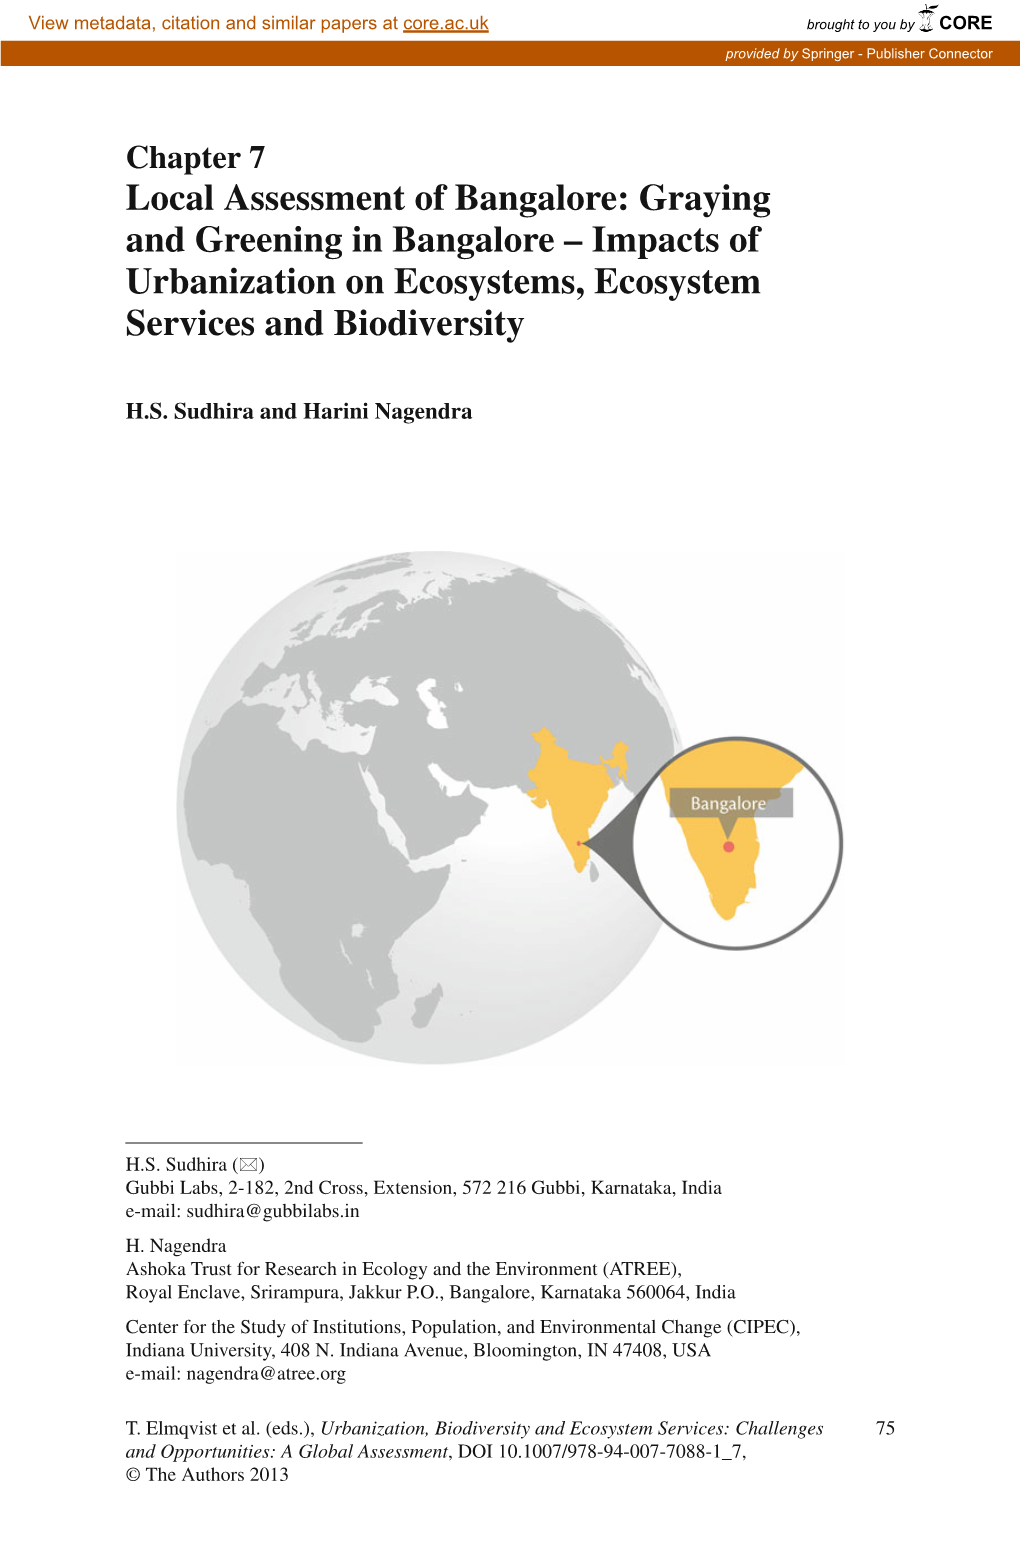 Local Assessment of Bangalore: Graying and Greening in Bangalore – Impacts of Urbanization on Ecosystems, Ecosystem Services and Biodiversity